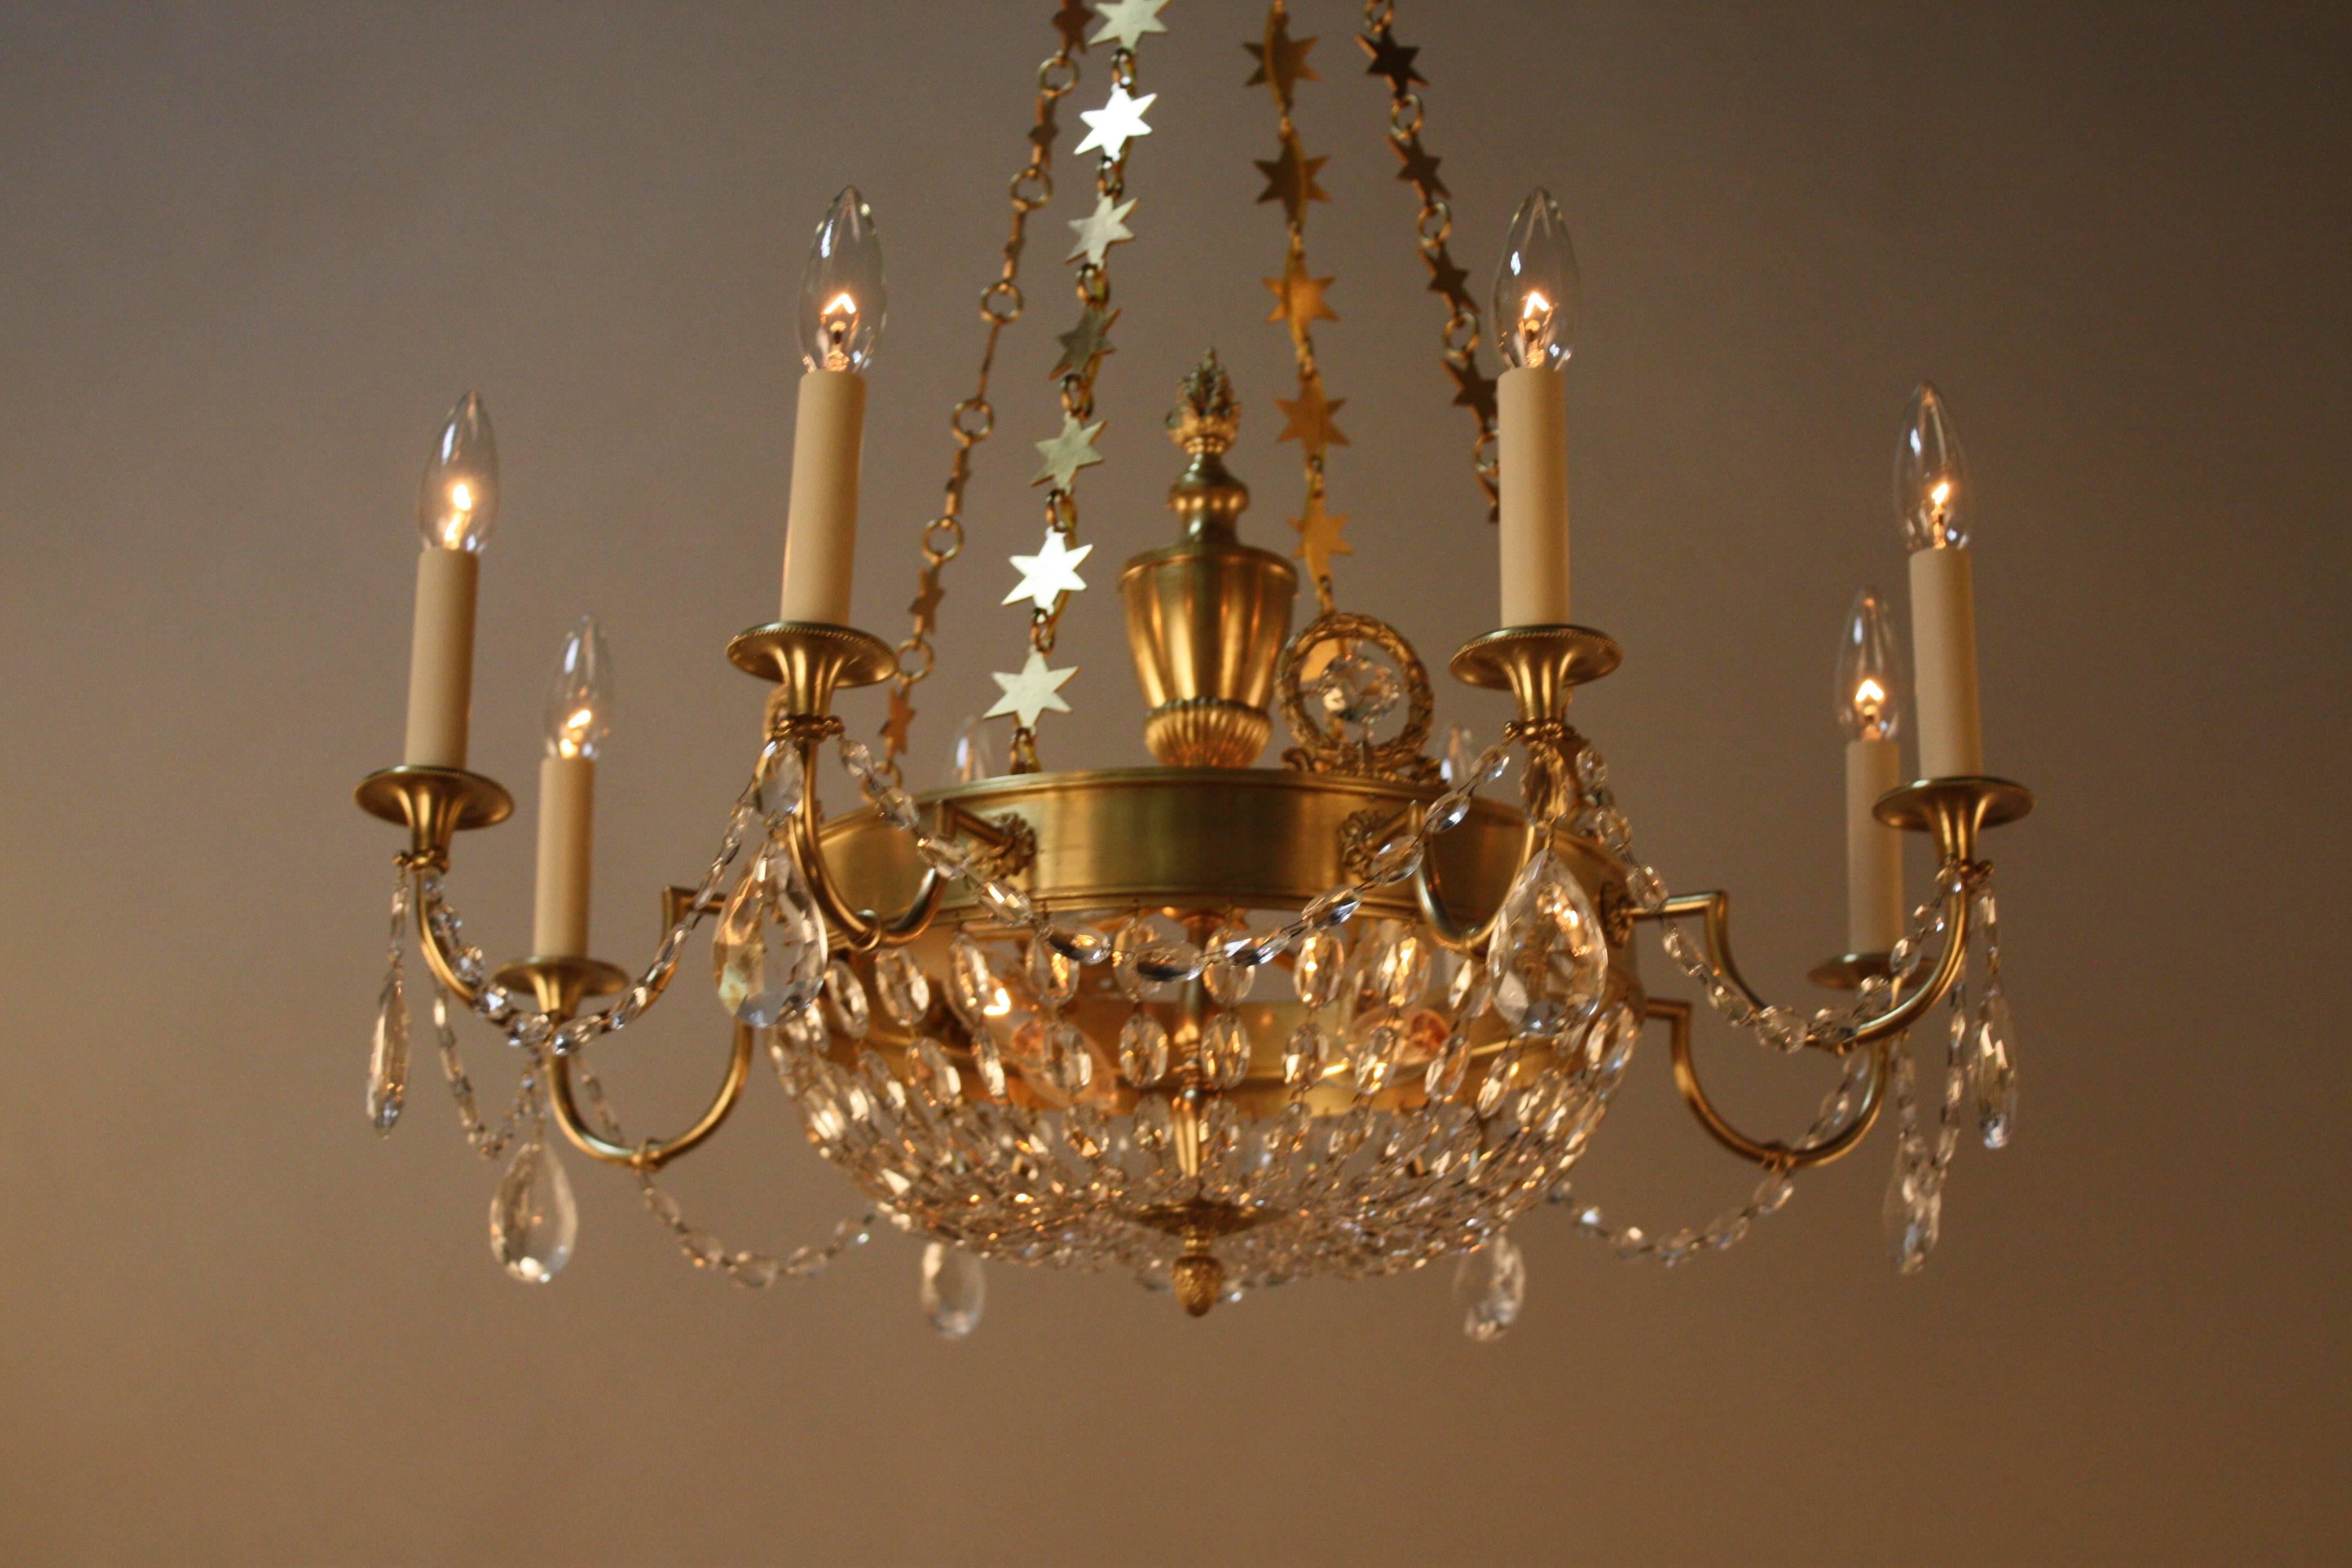 An early 20th century Empire style French bronze and crystal chandelier.
Twelve -light 60watt max each.